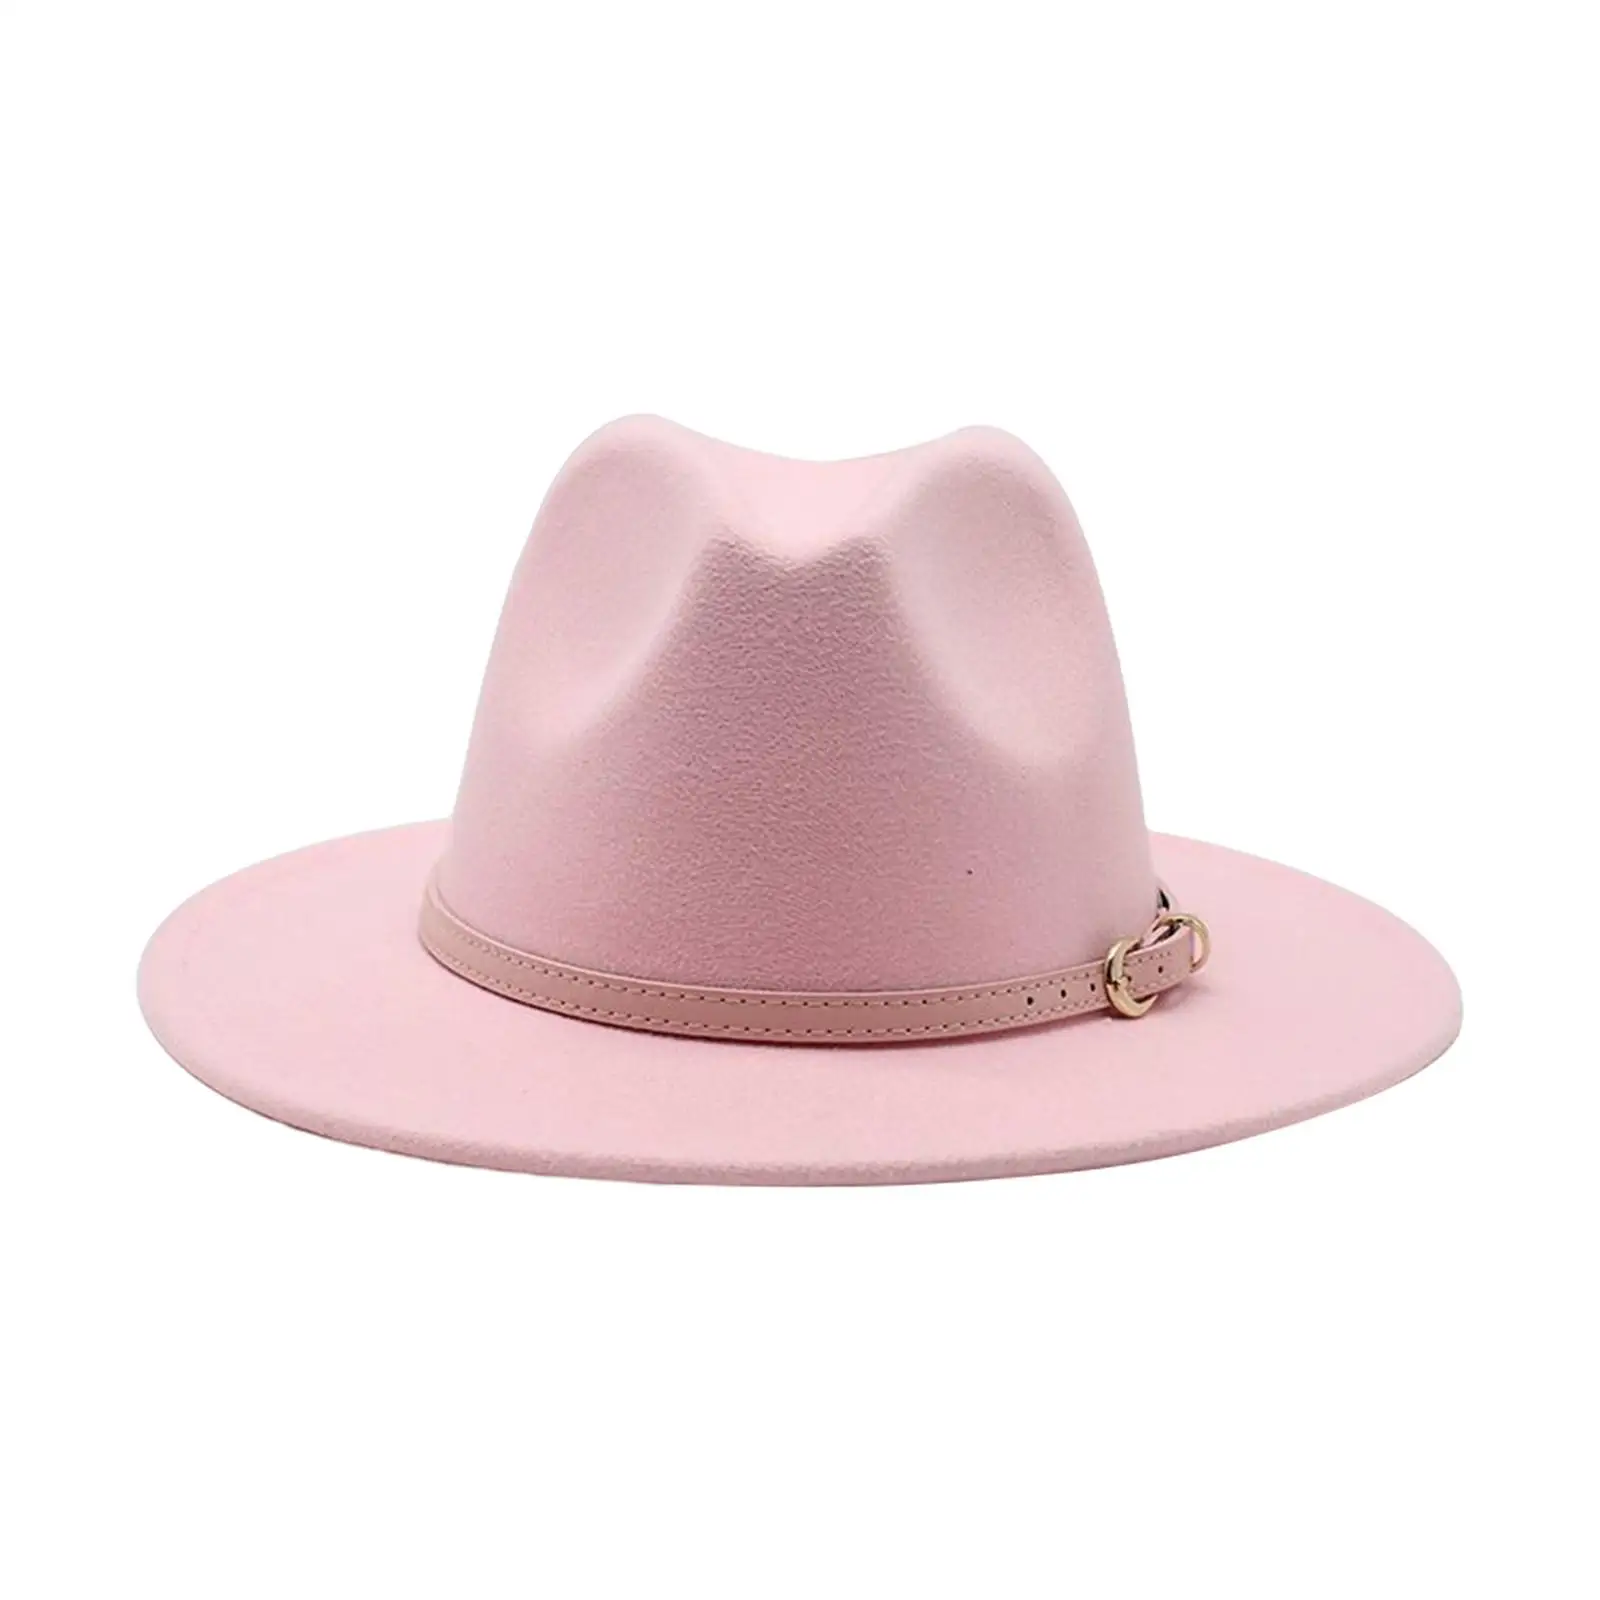 Women Fedora Hats Classic Belt Buckle Thermal Cowgirl Cap Wide Brim Casual Adjustable Panama Hat for Beach Travel Party Adults